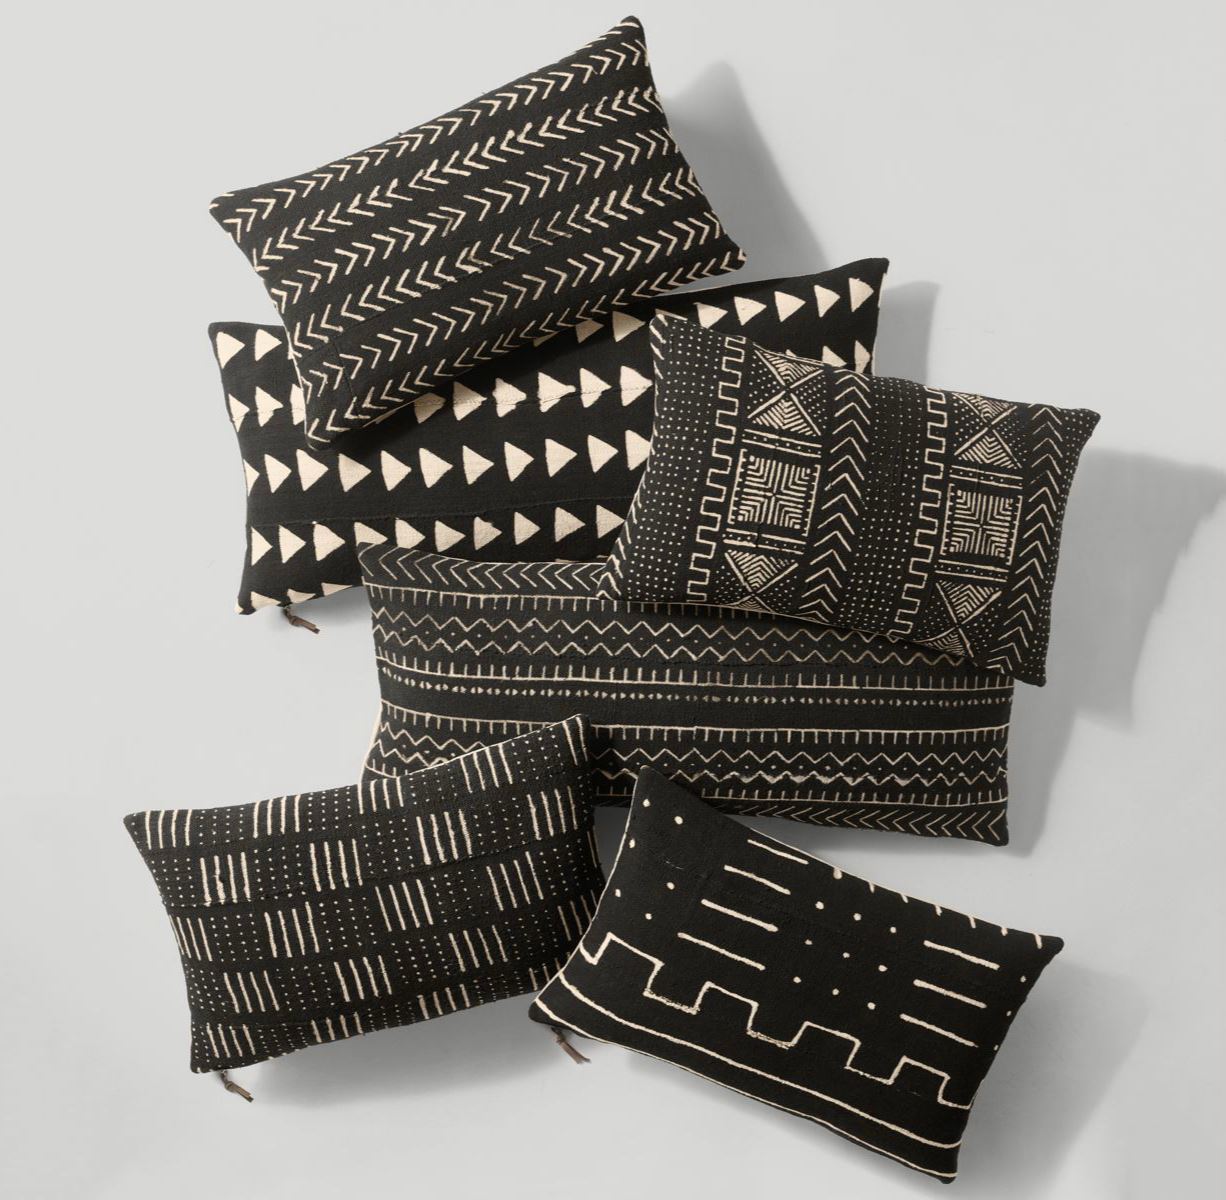 Mud cloth pillows from Restoration Hardware